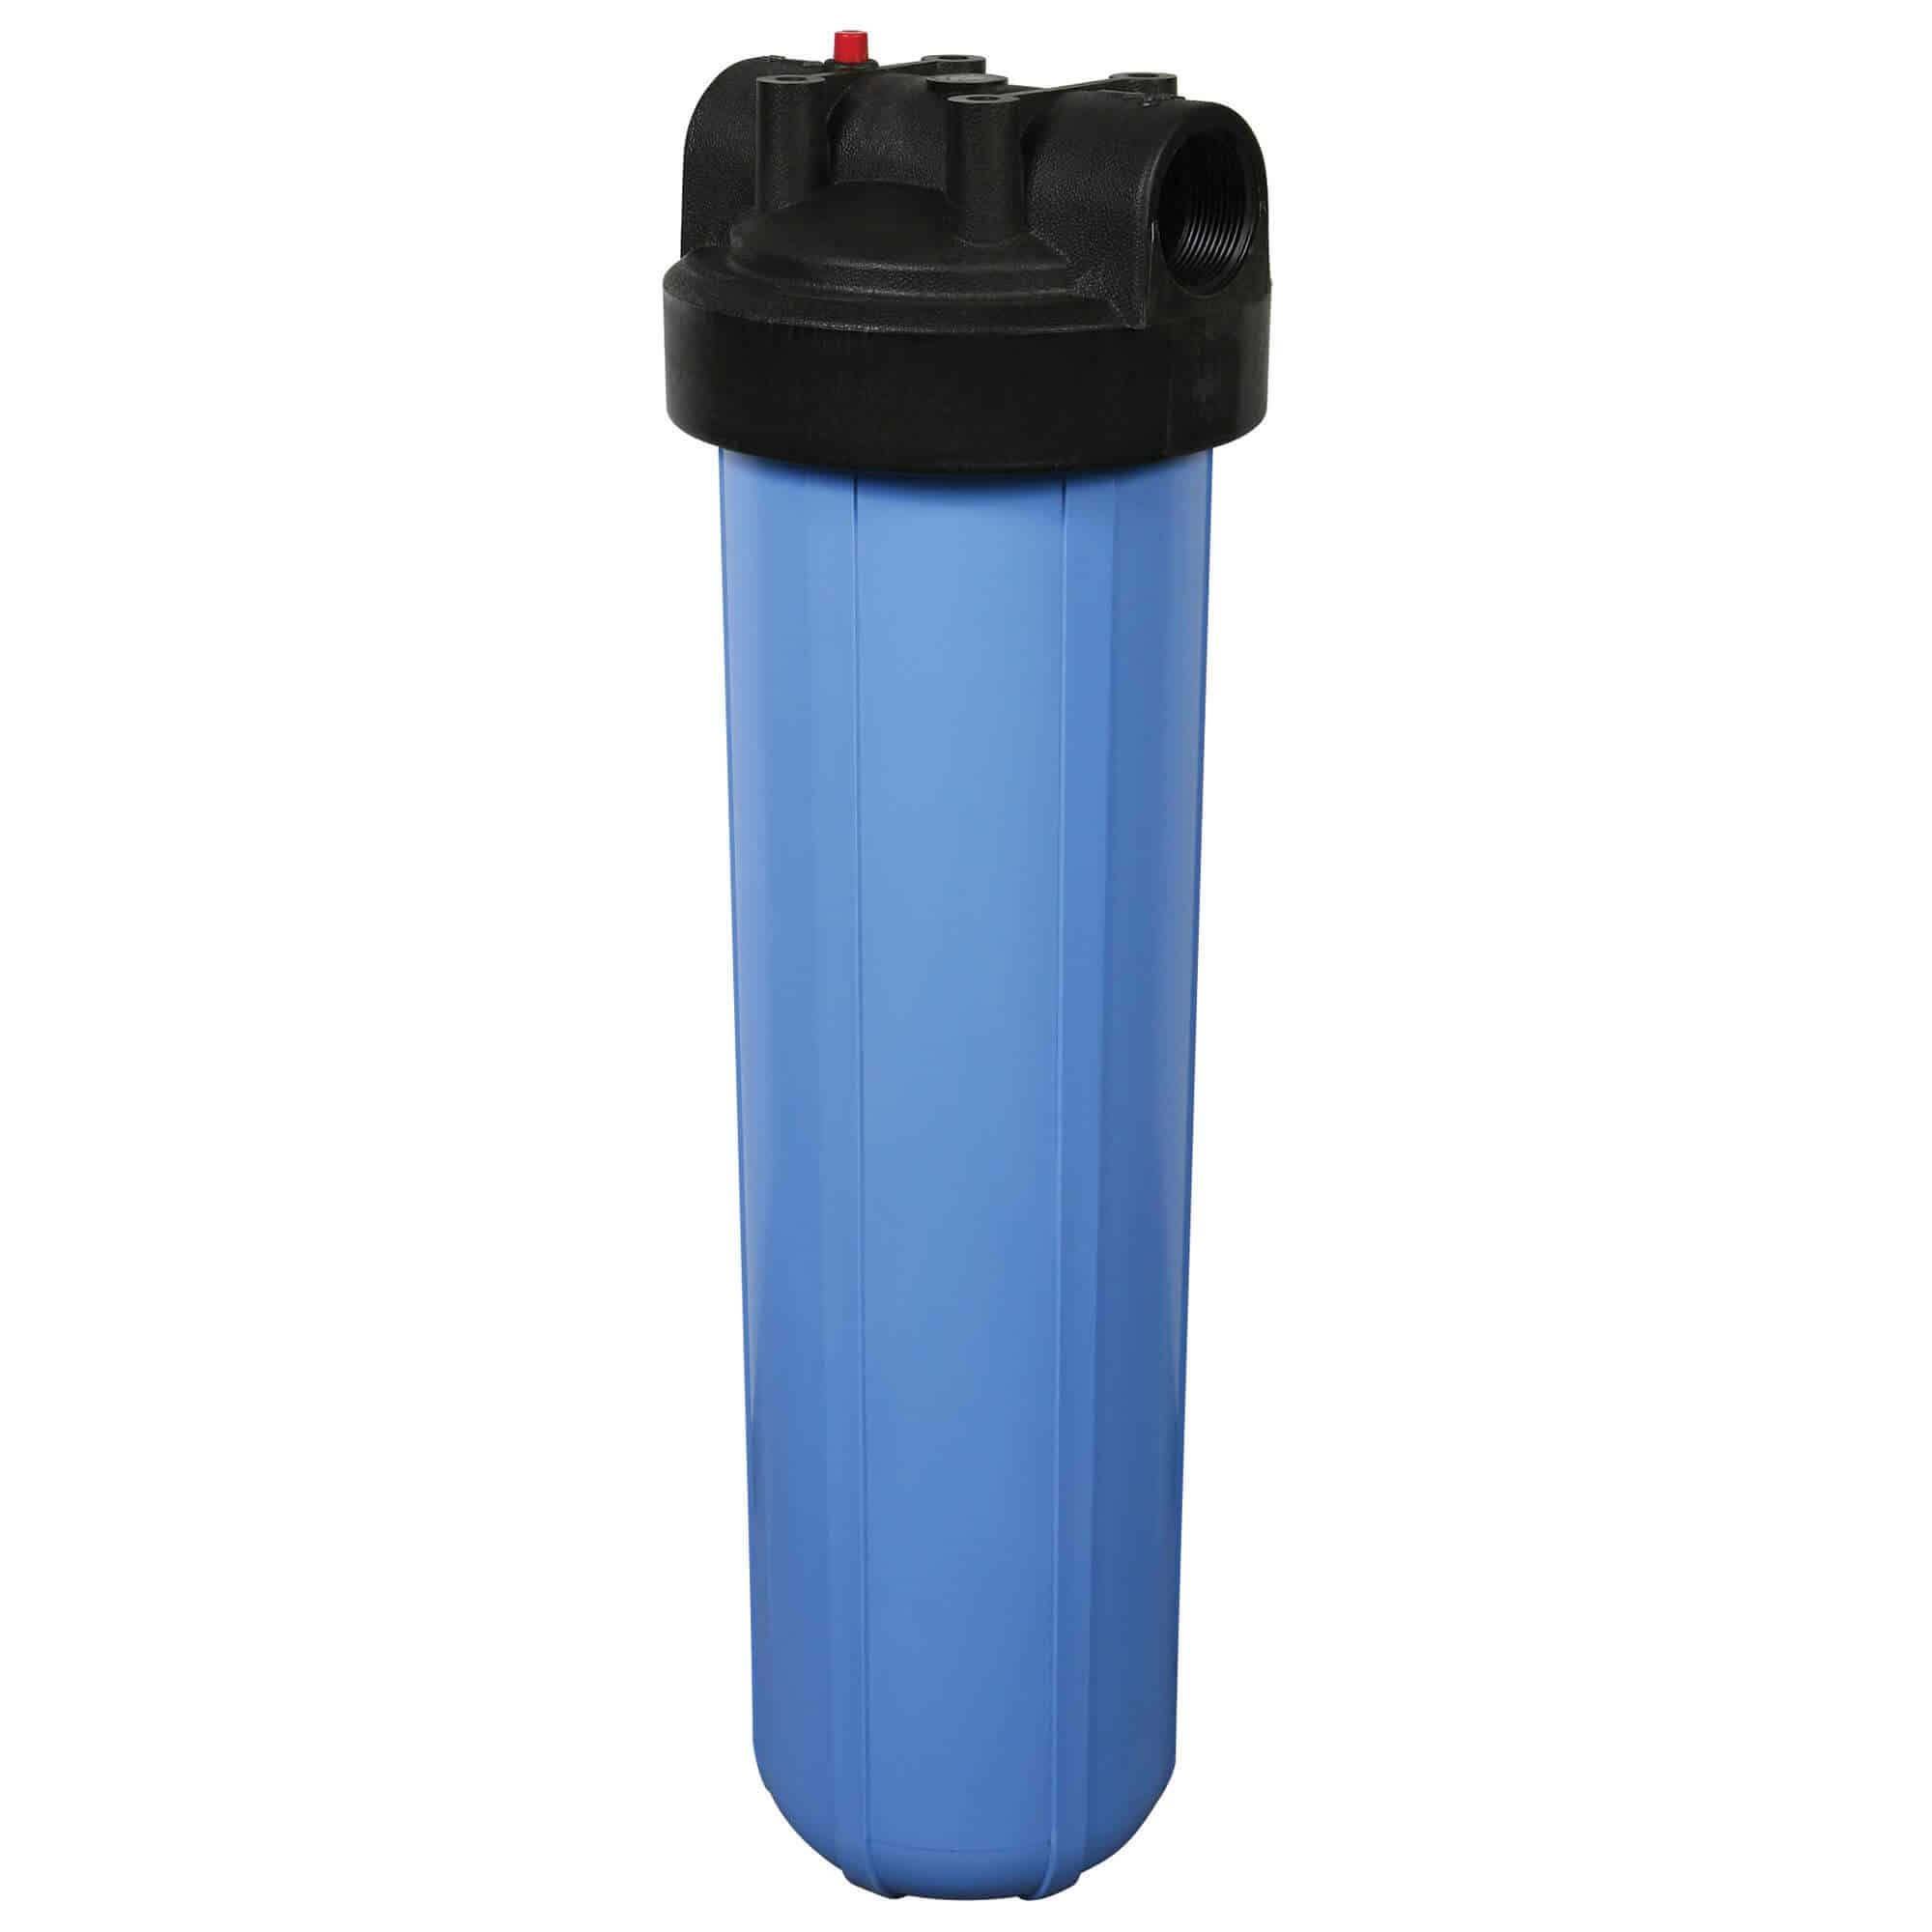 Experience Superior Water Filtration with CoPure Big Blue Filters in Australia